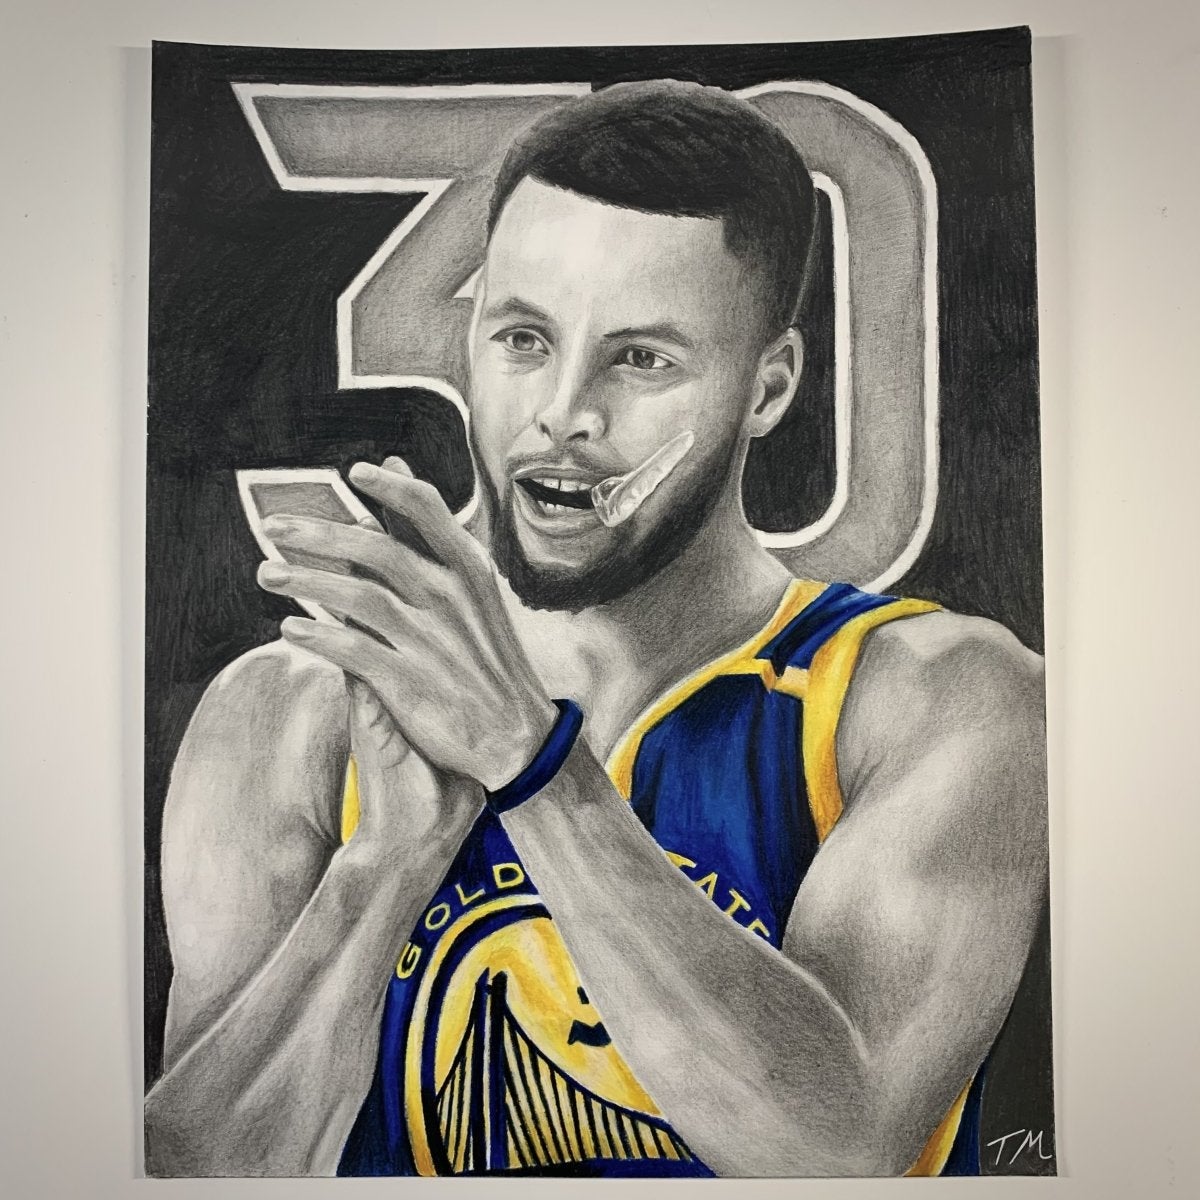 5 Times Steph Curry Went Full Anime | Steph Curry is anime IRL. | By  Everyday Anime | Facebook